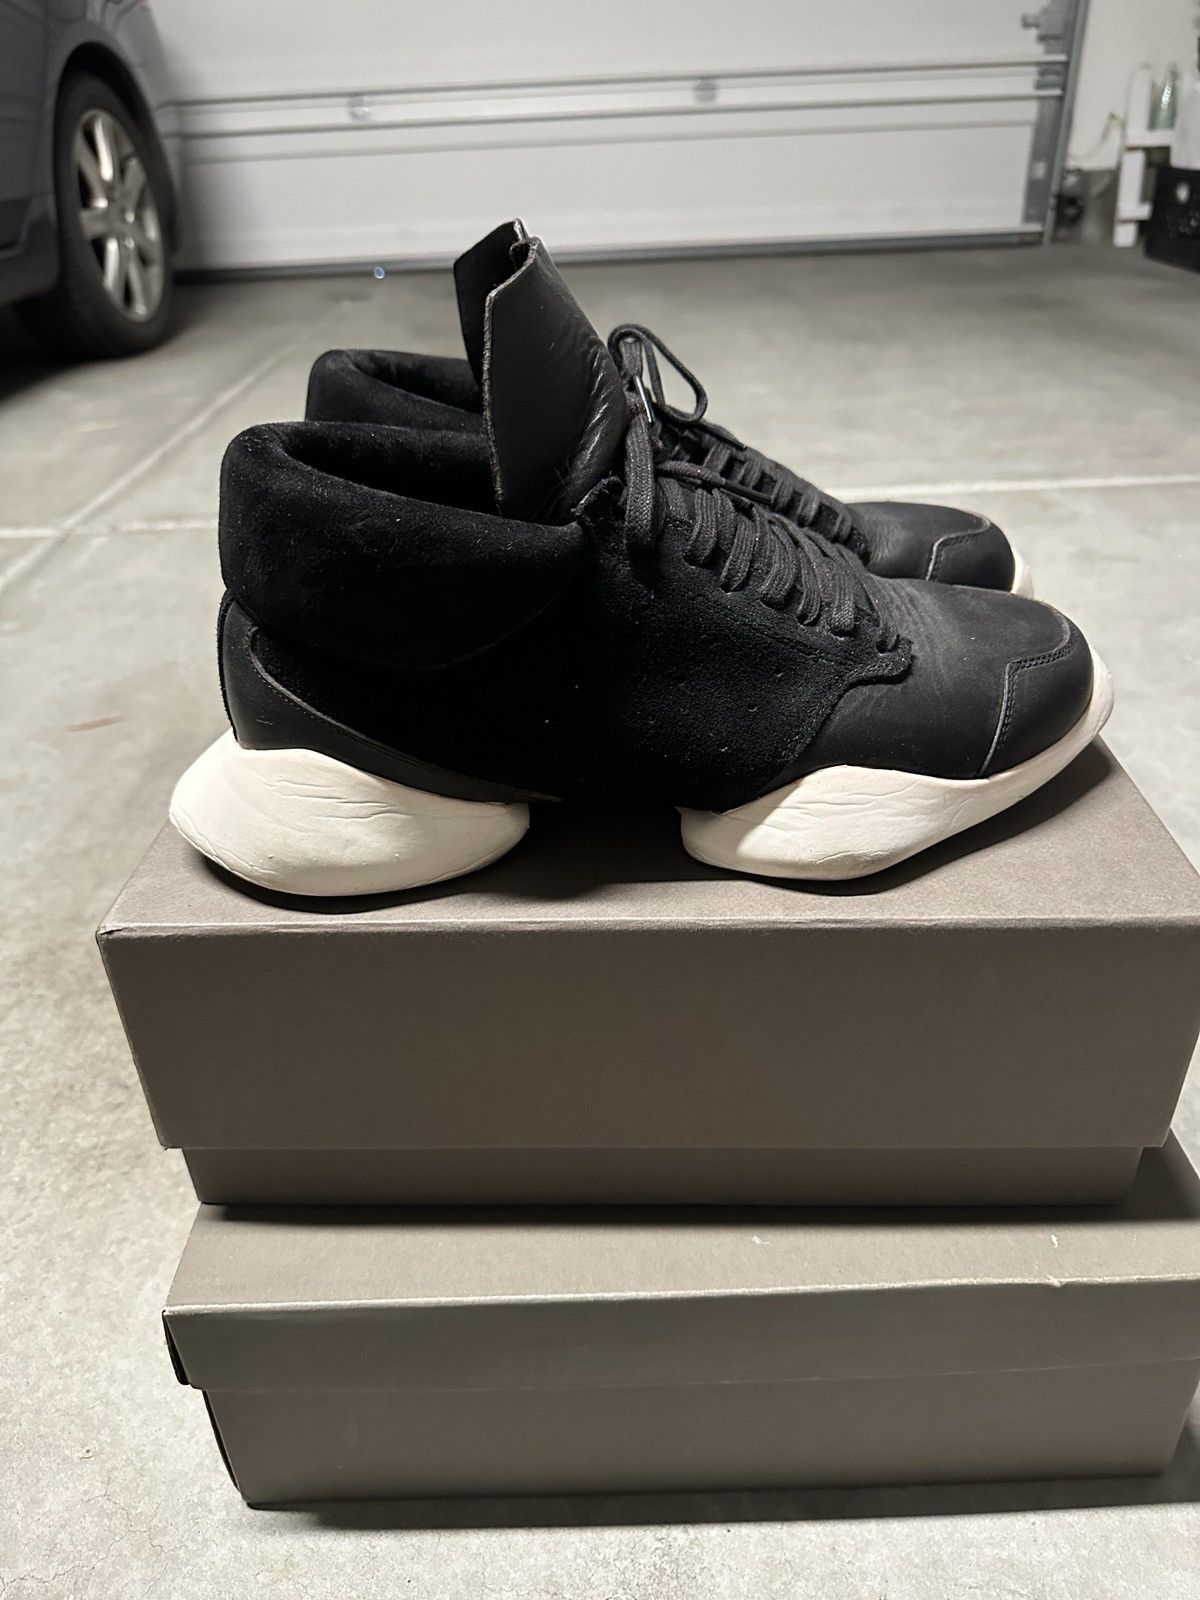 Adidas Rick Owens x Adidas Vicious Leather Tech Runner Runners Size US 10 / EU 43 - 2 Preview